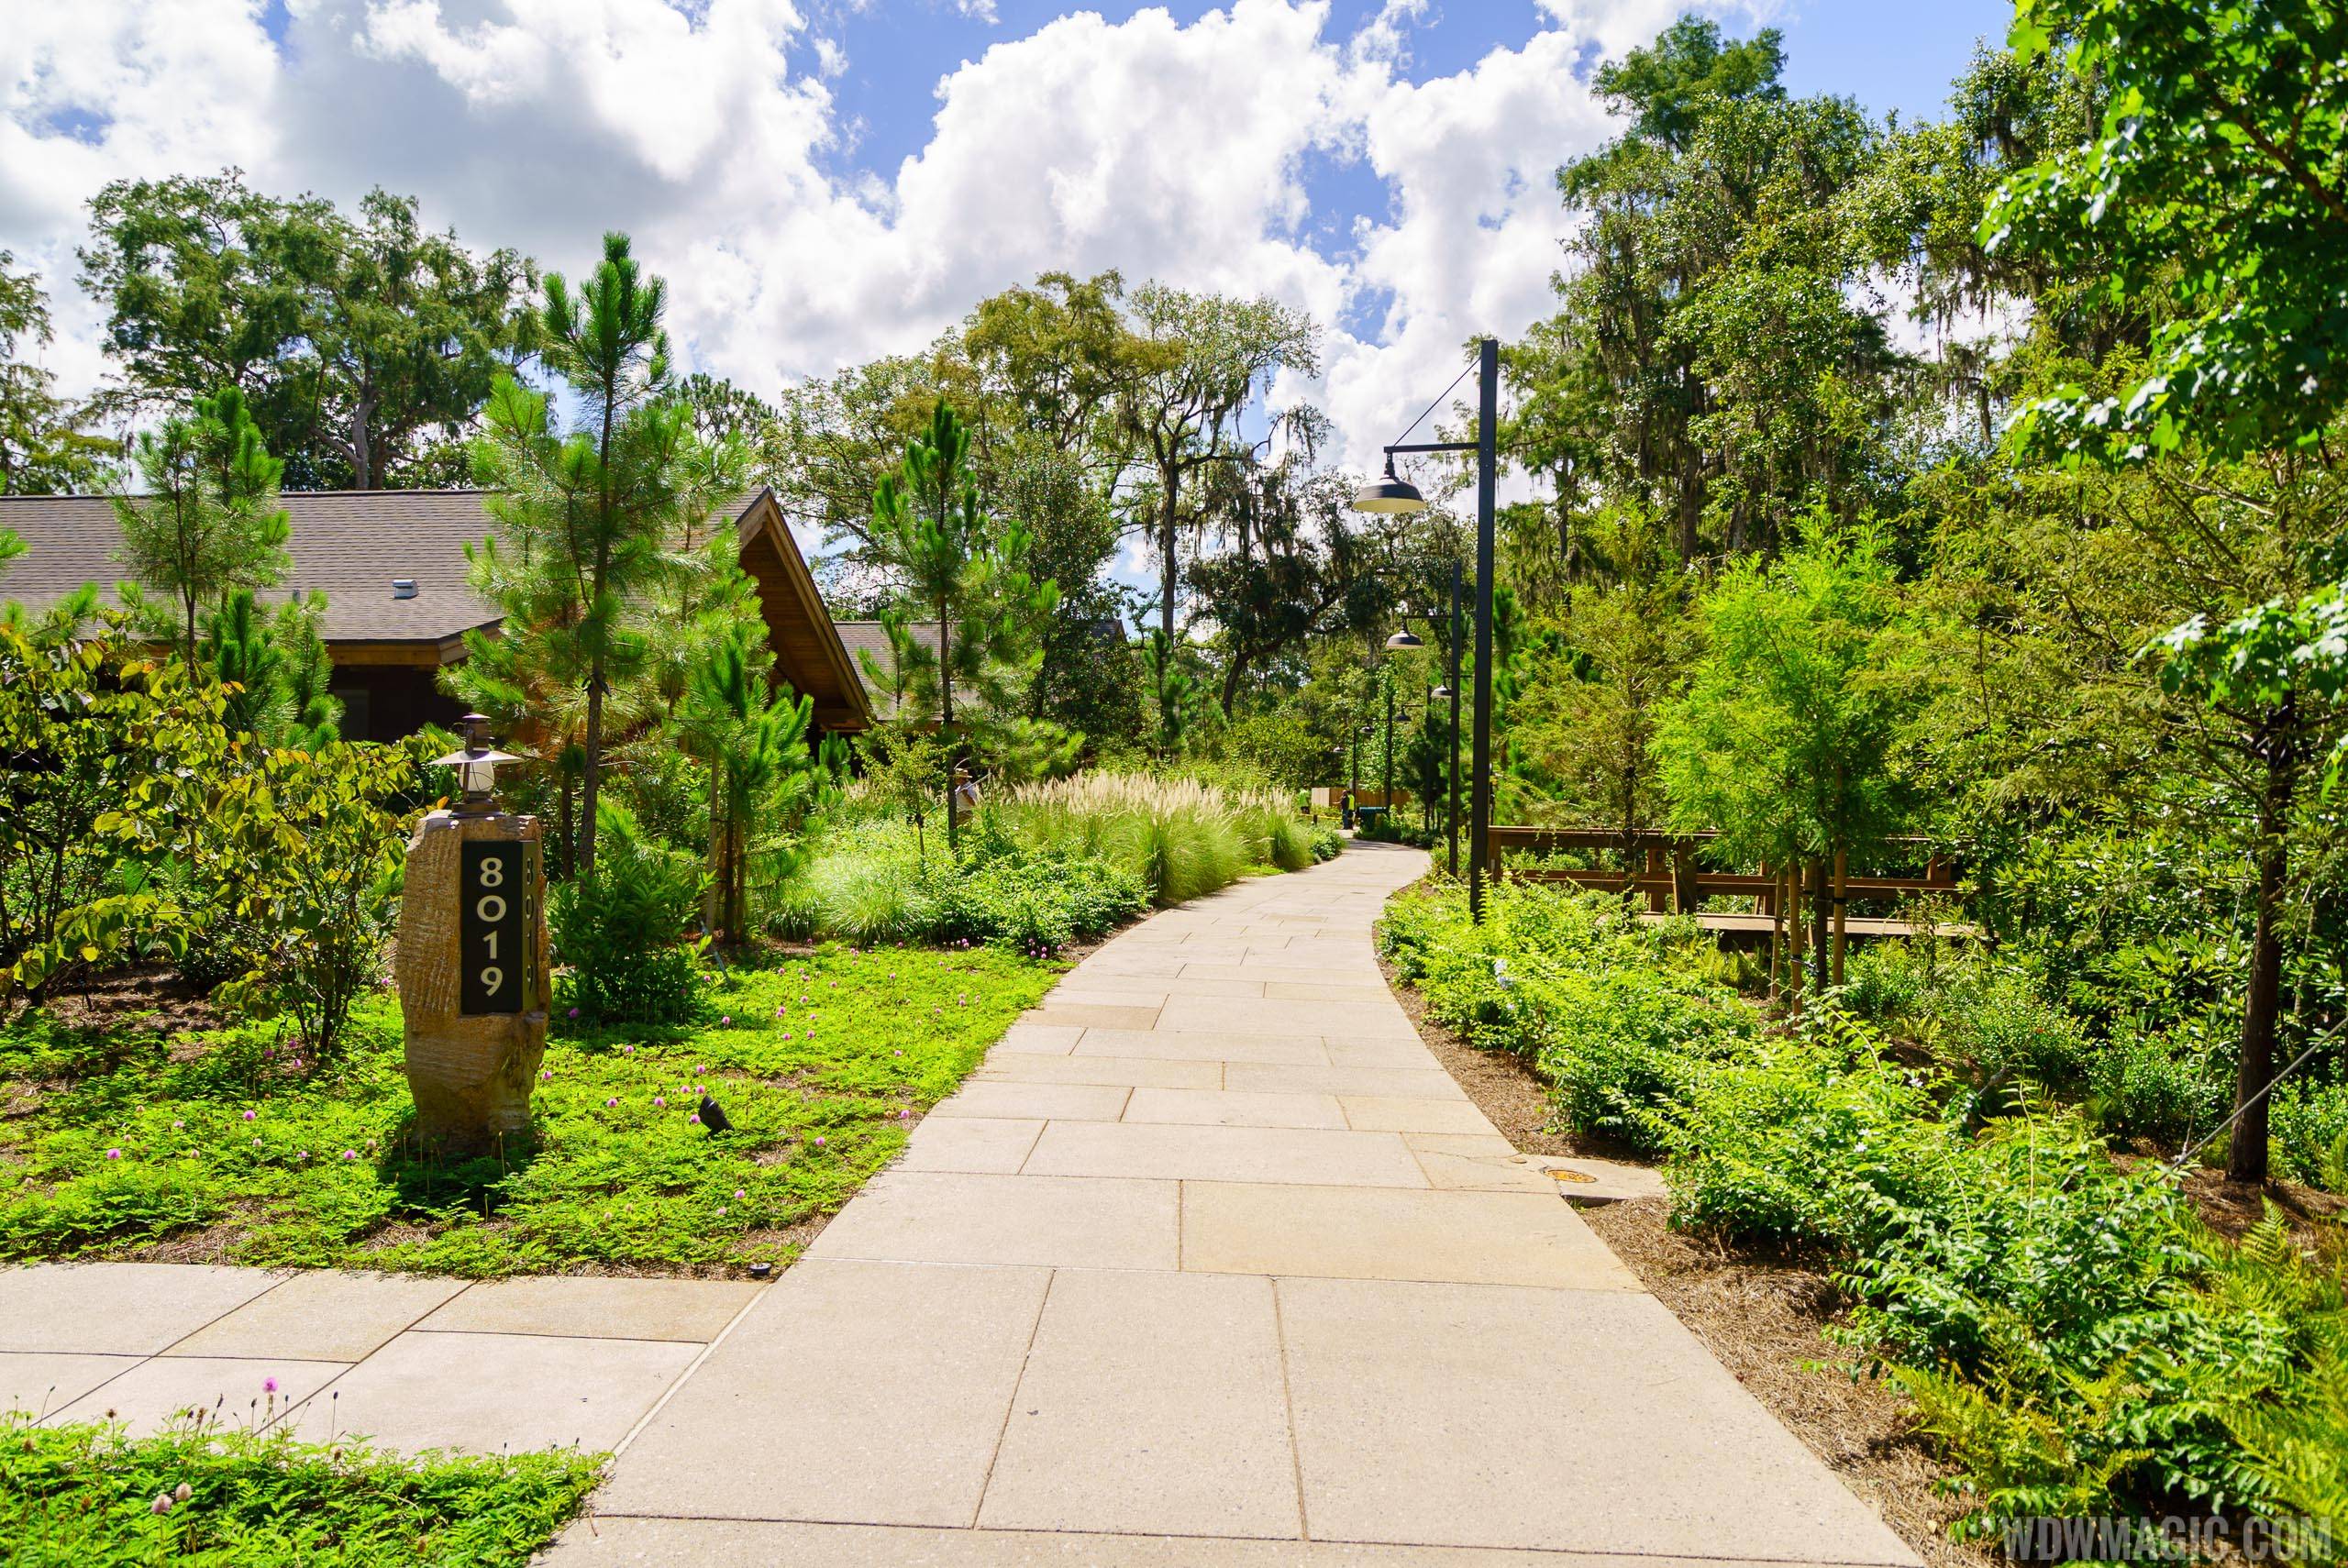 Copper Creek Villas and Cabins at Disney's Wilderness Lodge - Walkway to Cabins